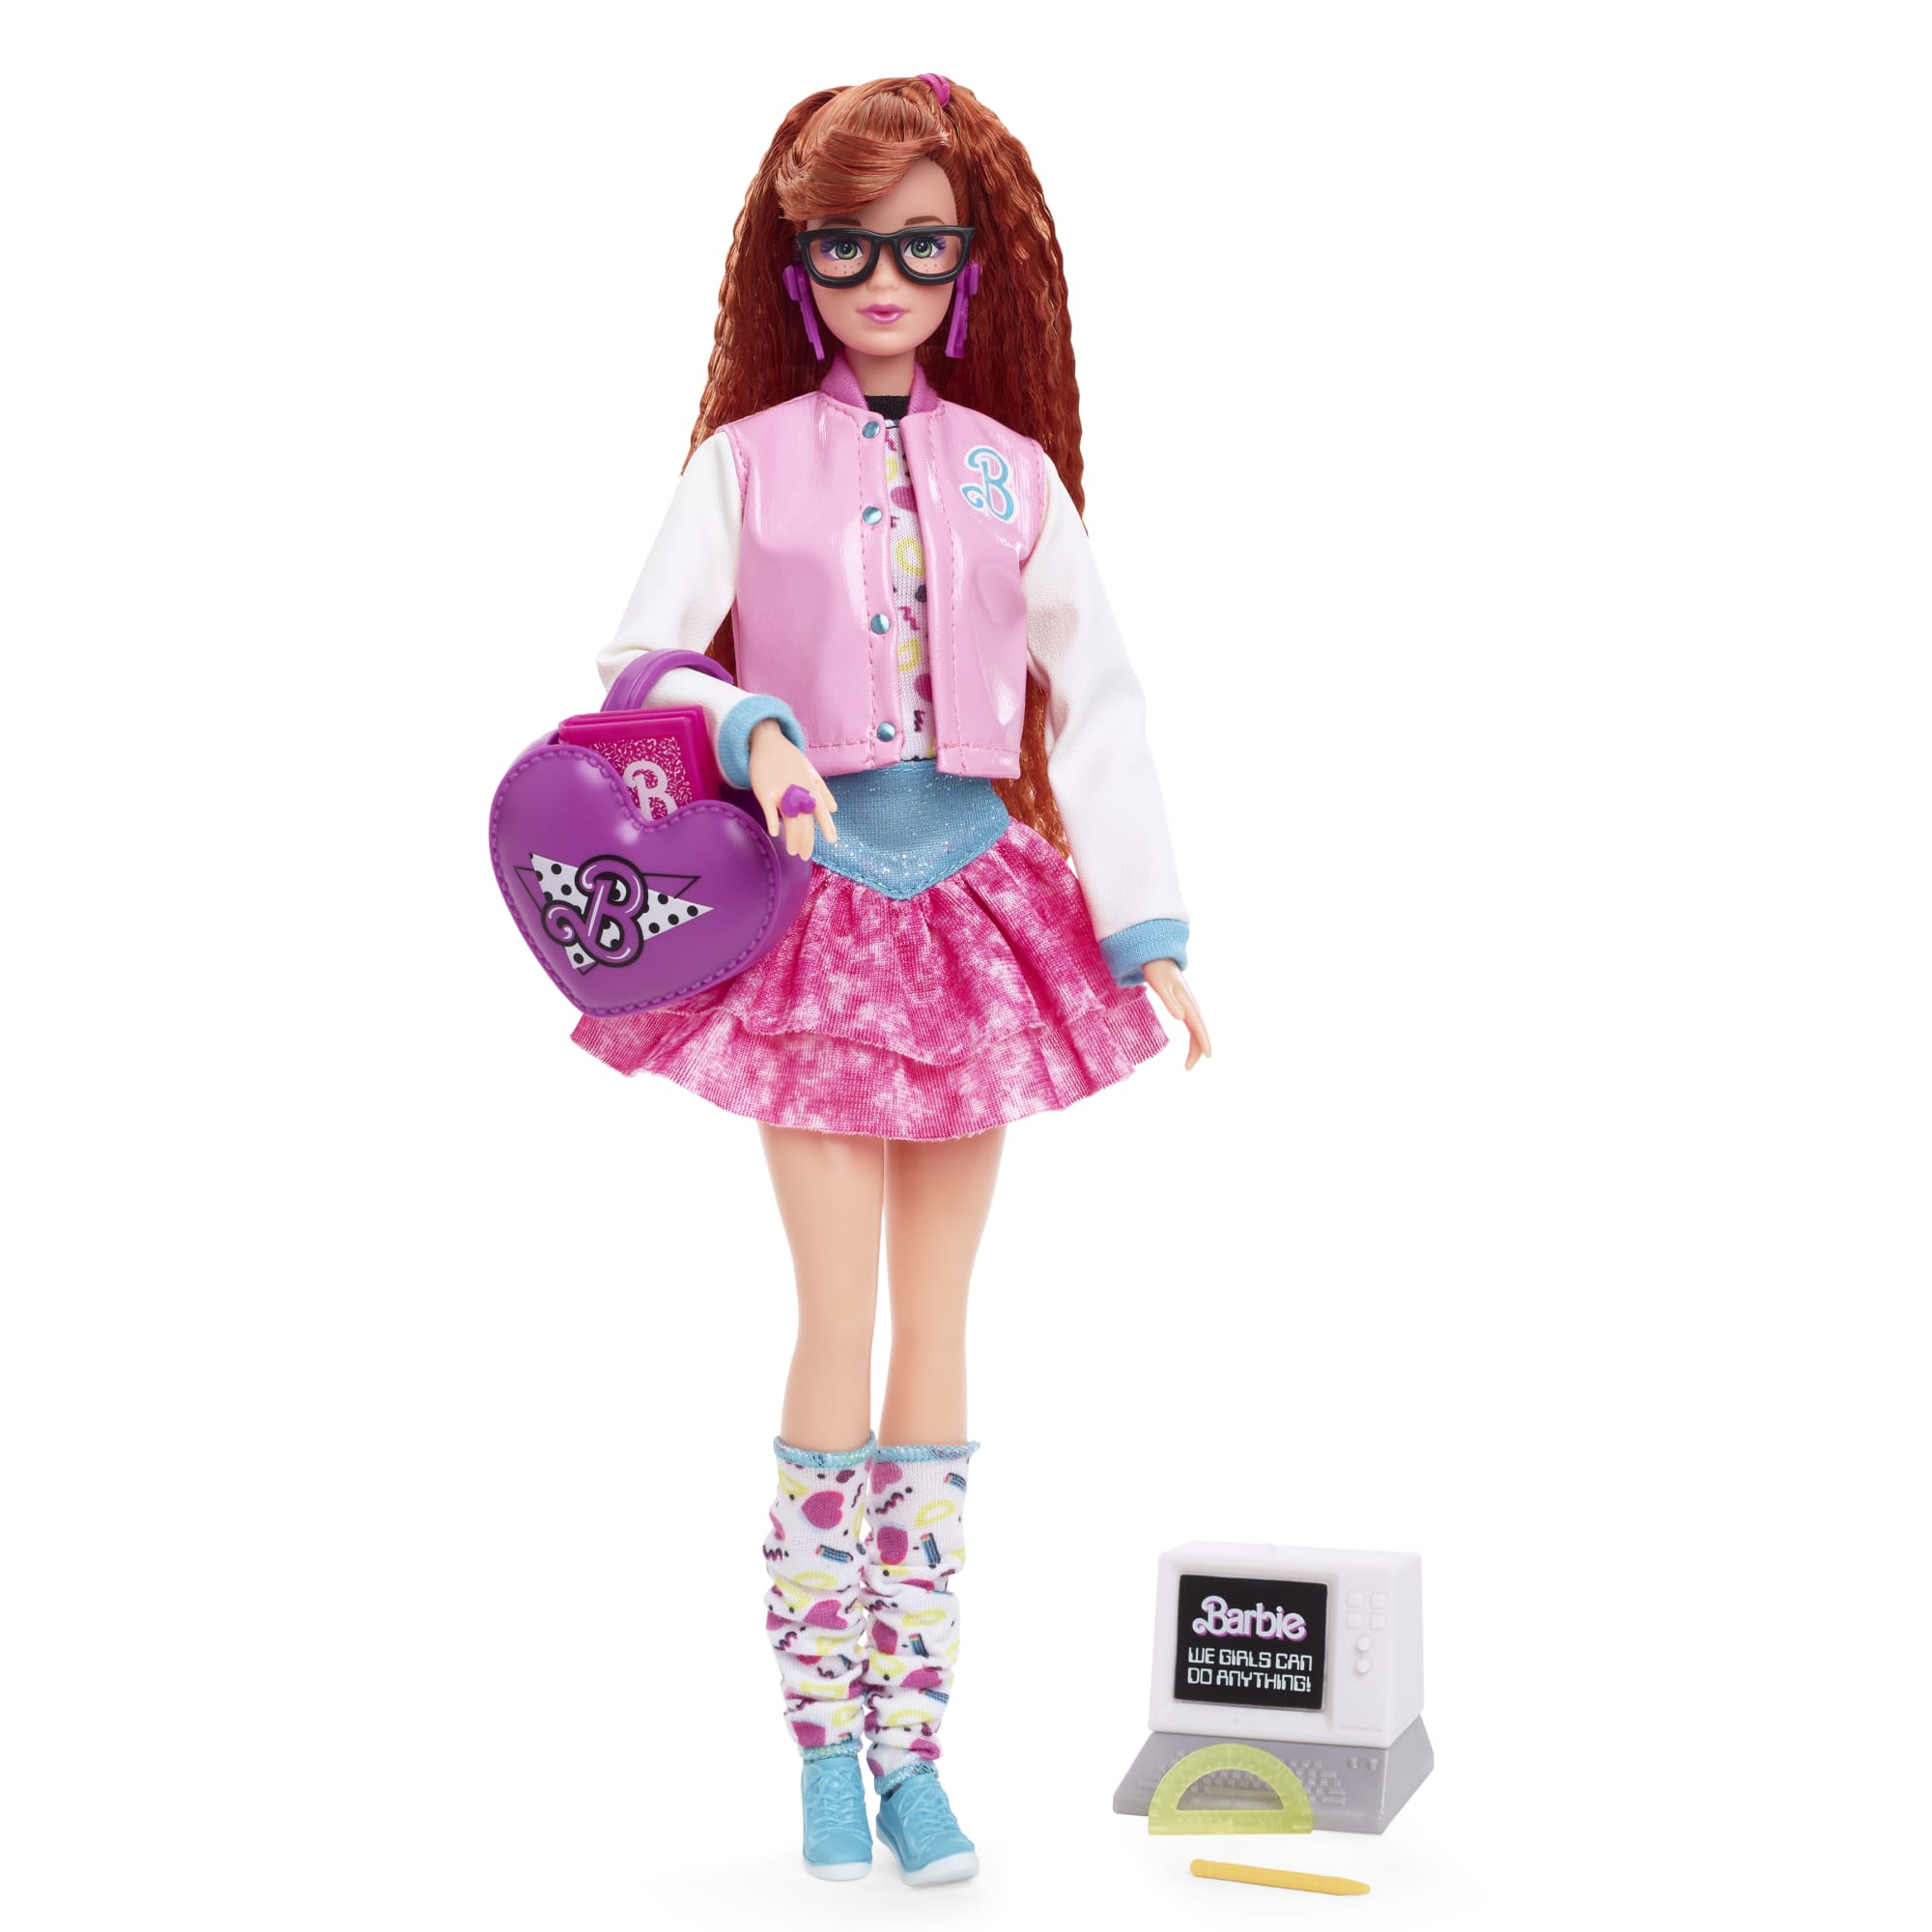 Barbie Rewind Doll and Accessories HBY13